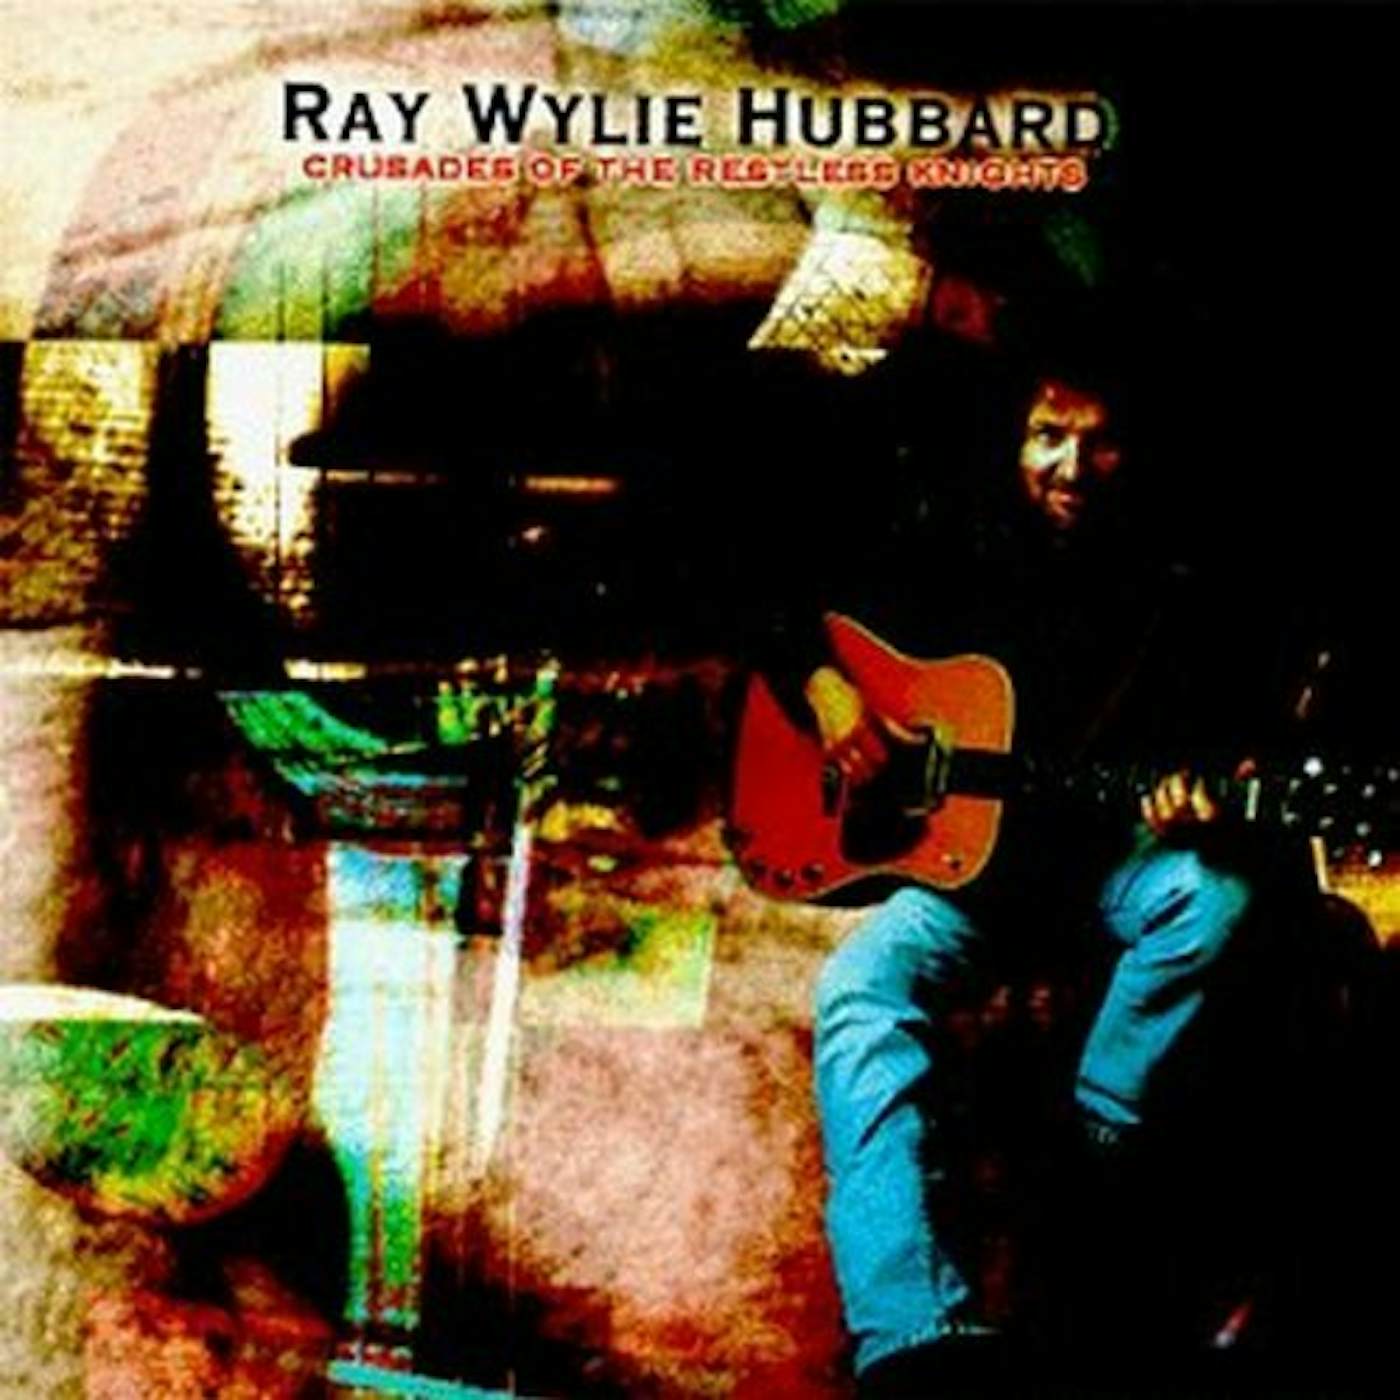 Ray Wylie Hubbard CRUSADES OF THE RESTLESS NIGHTS CD